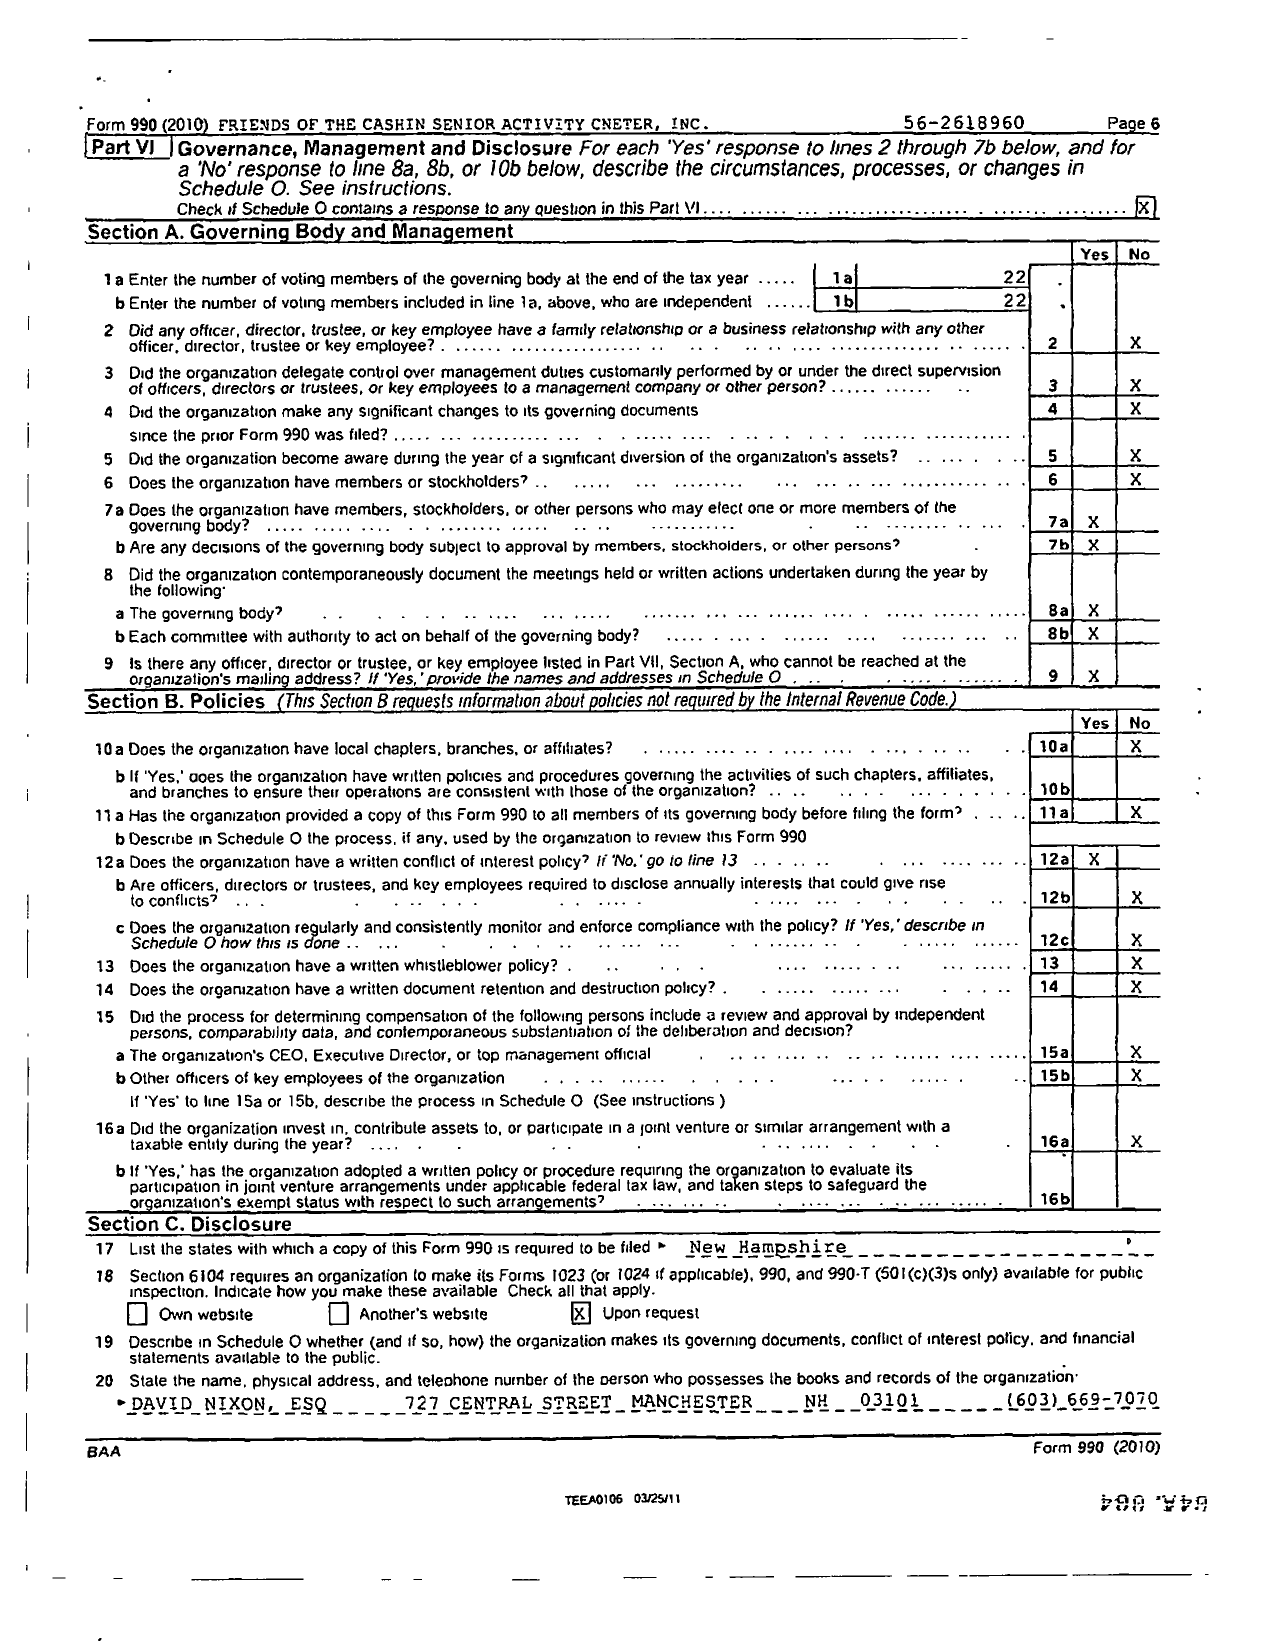 Image of first page of 2010 Form 990R for Friends of the Cashin Senior Activity Center